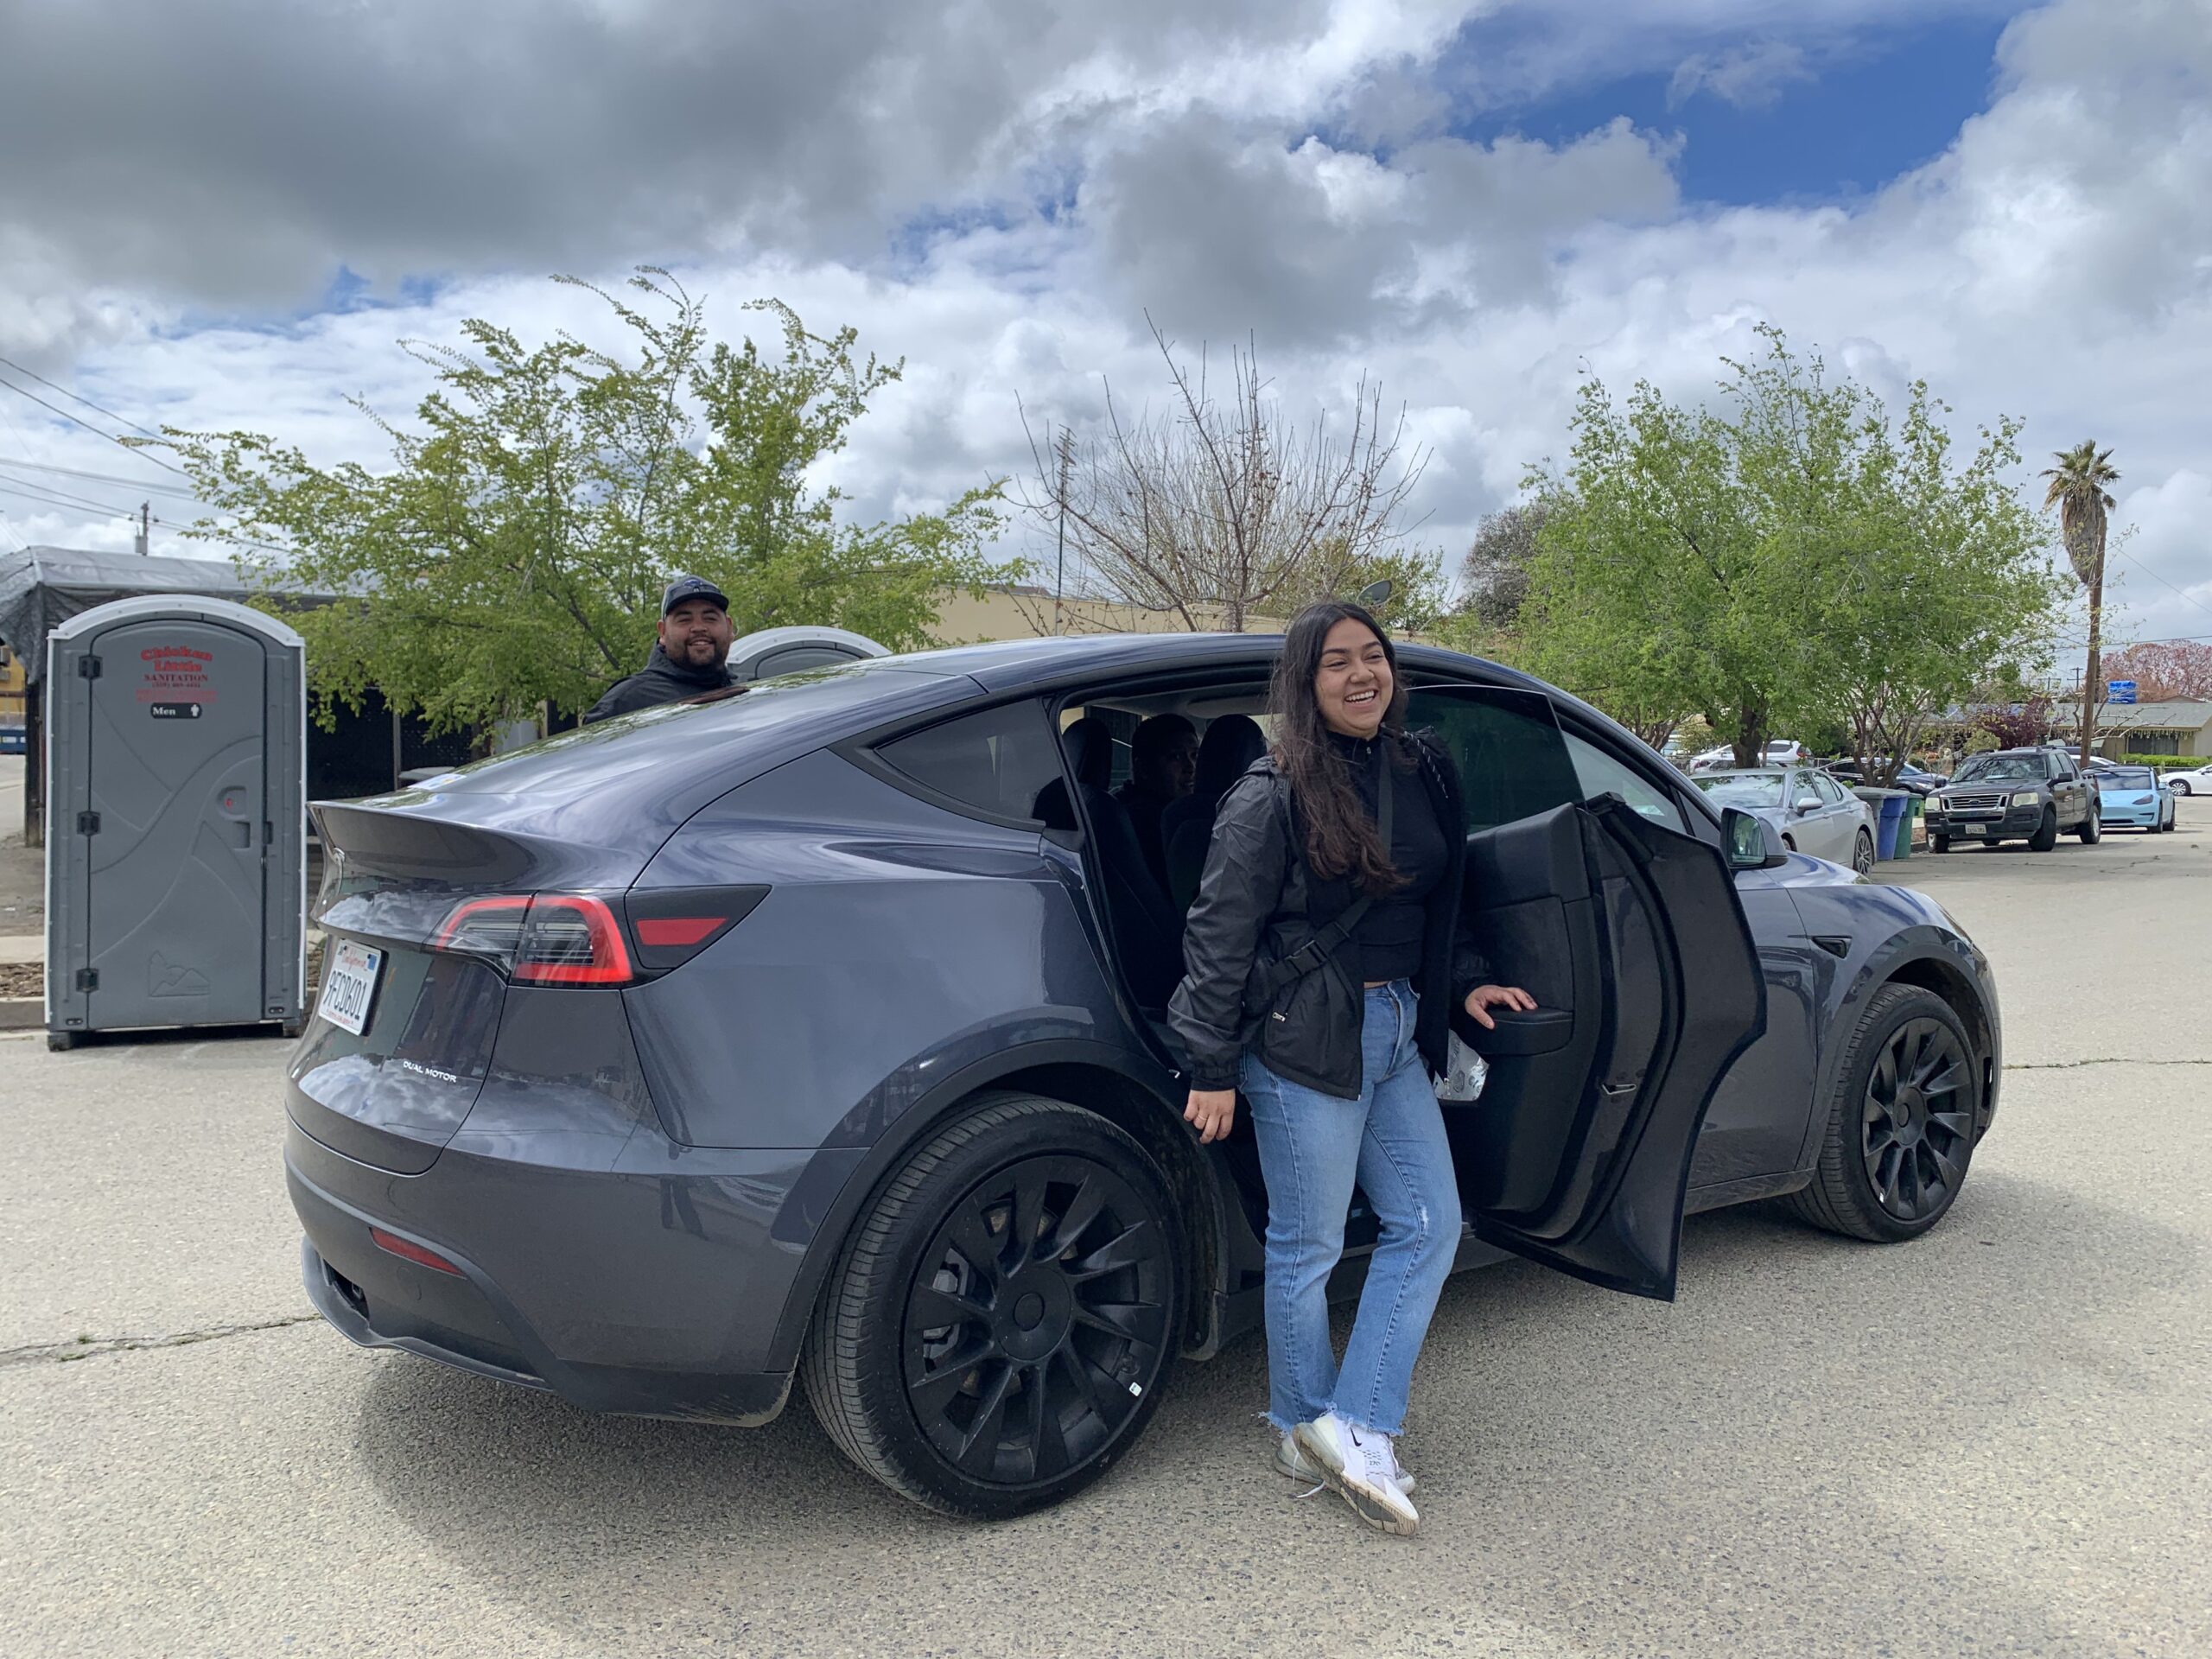 Two passangers alighting a electric vehicle in Huron, California